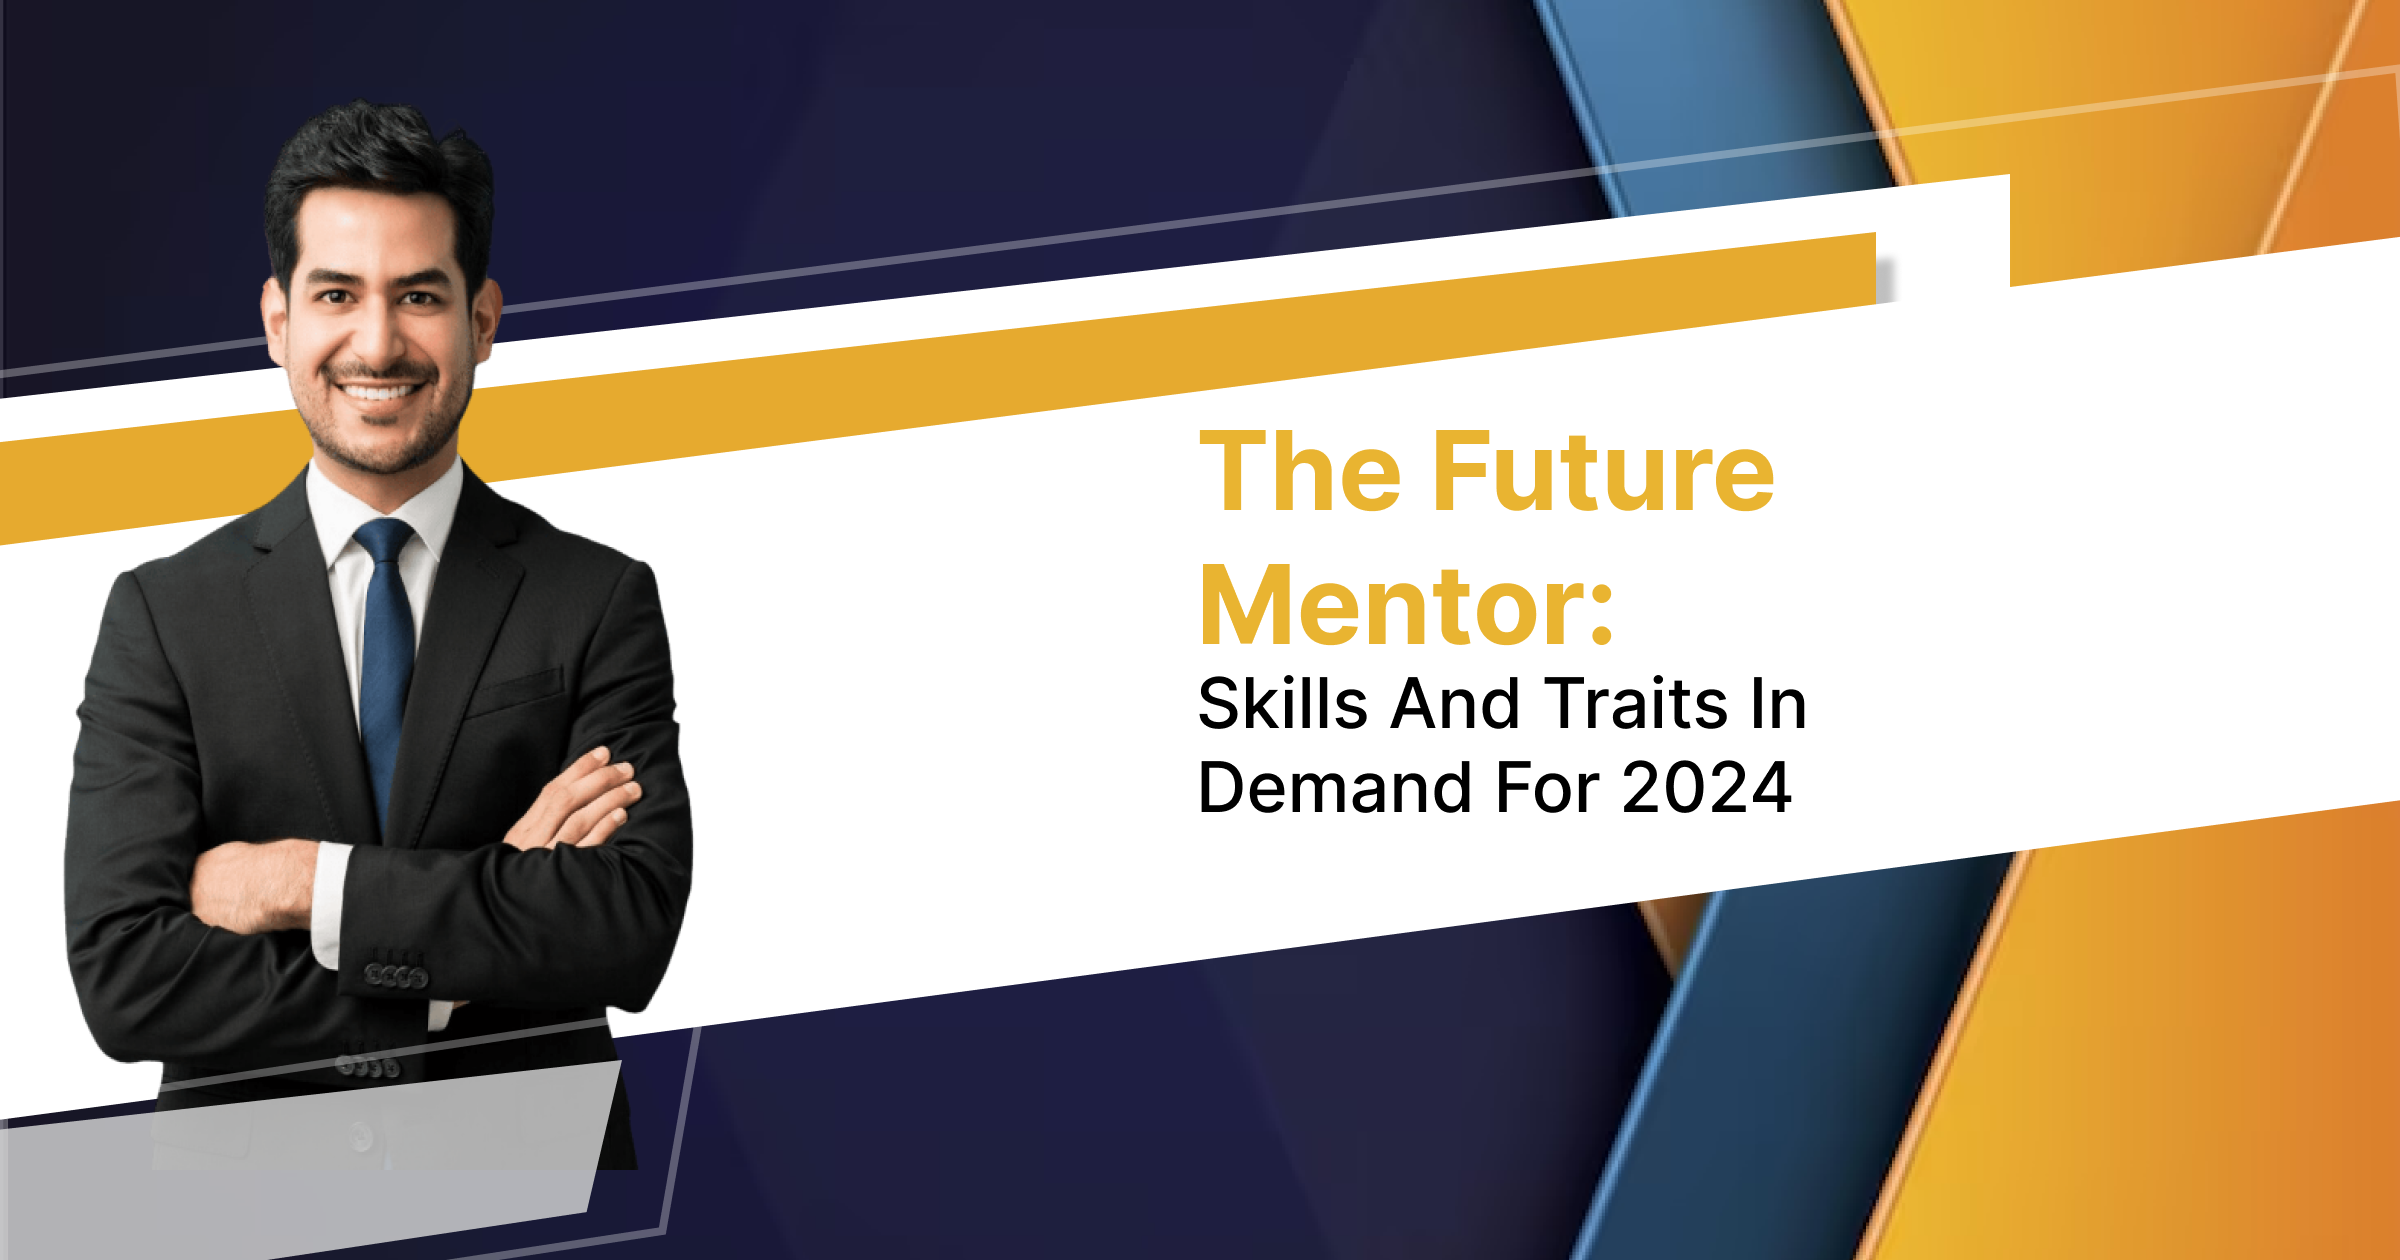 The Future Mentor: Skills And Traits In Demand For 2024